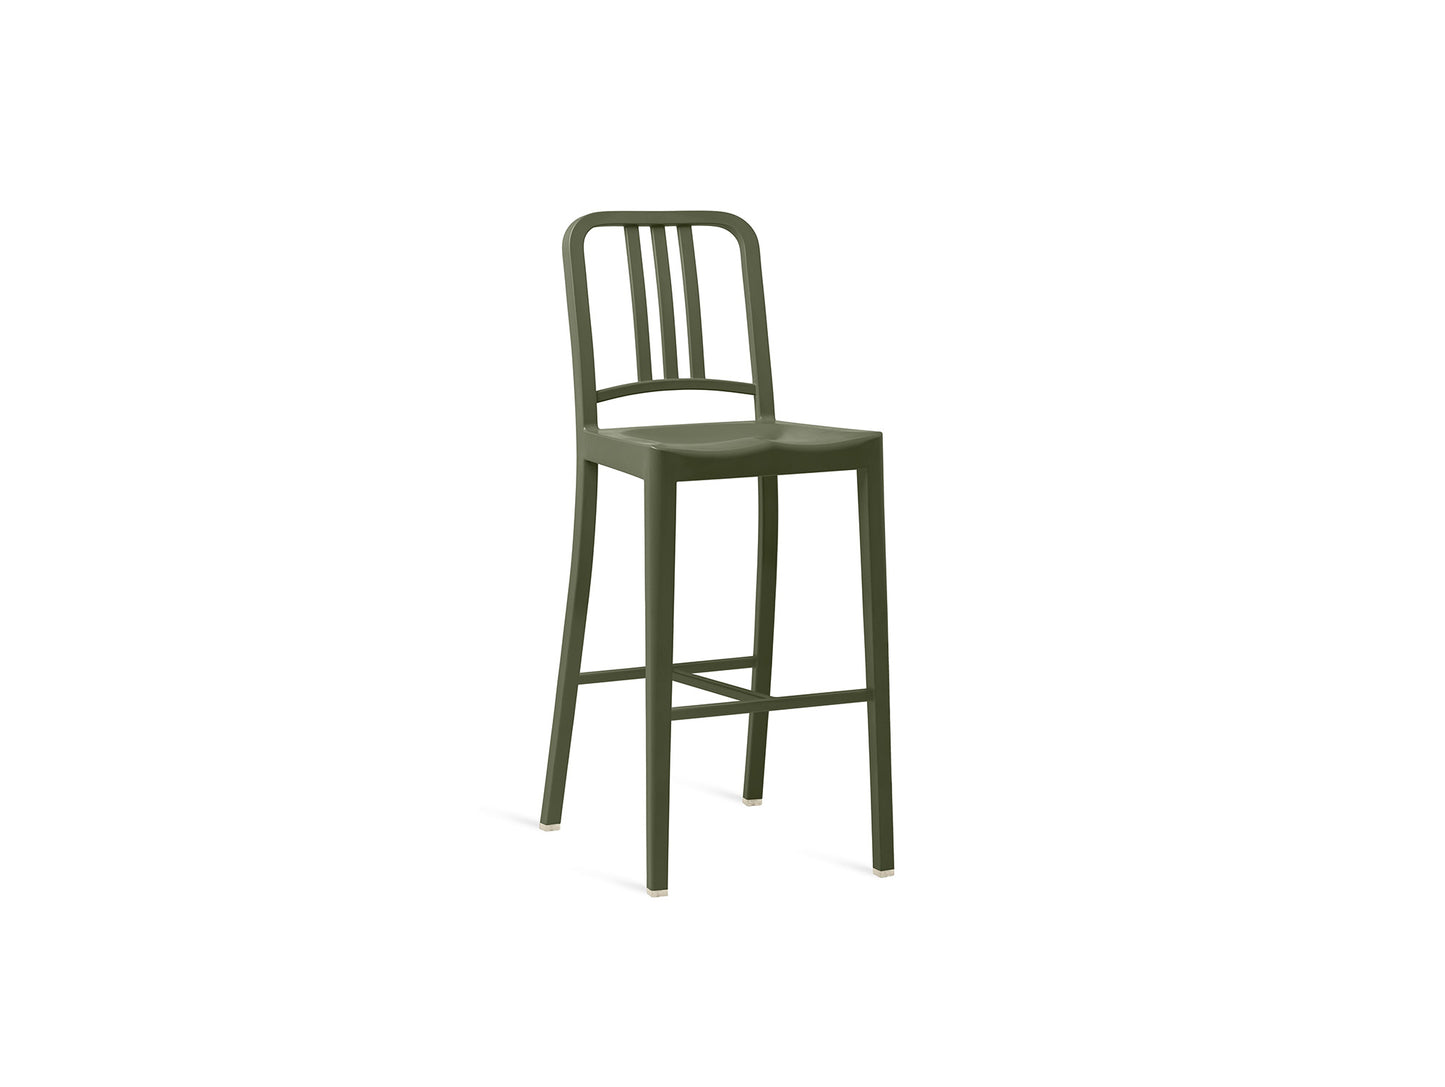 111 Navy Bar Stool by Emeco - Cypress Green 